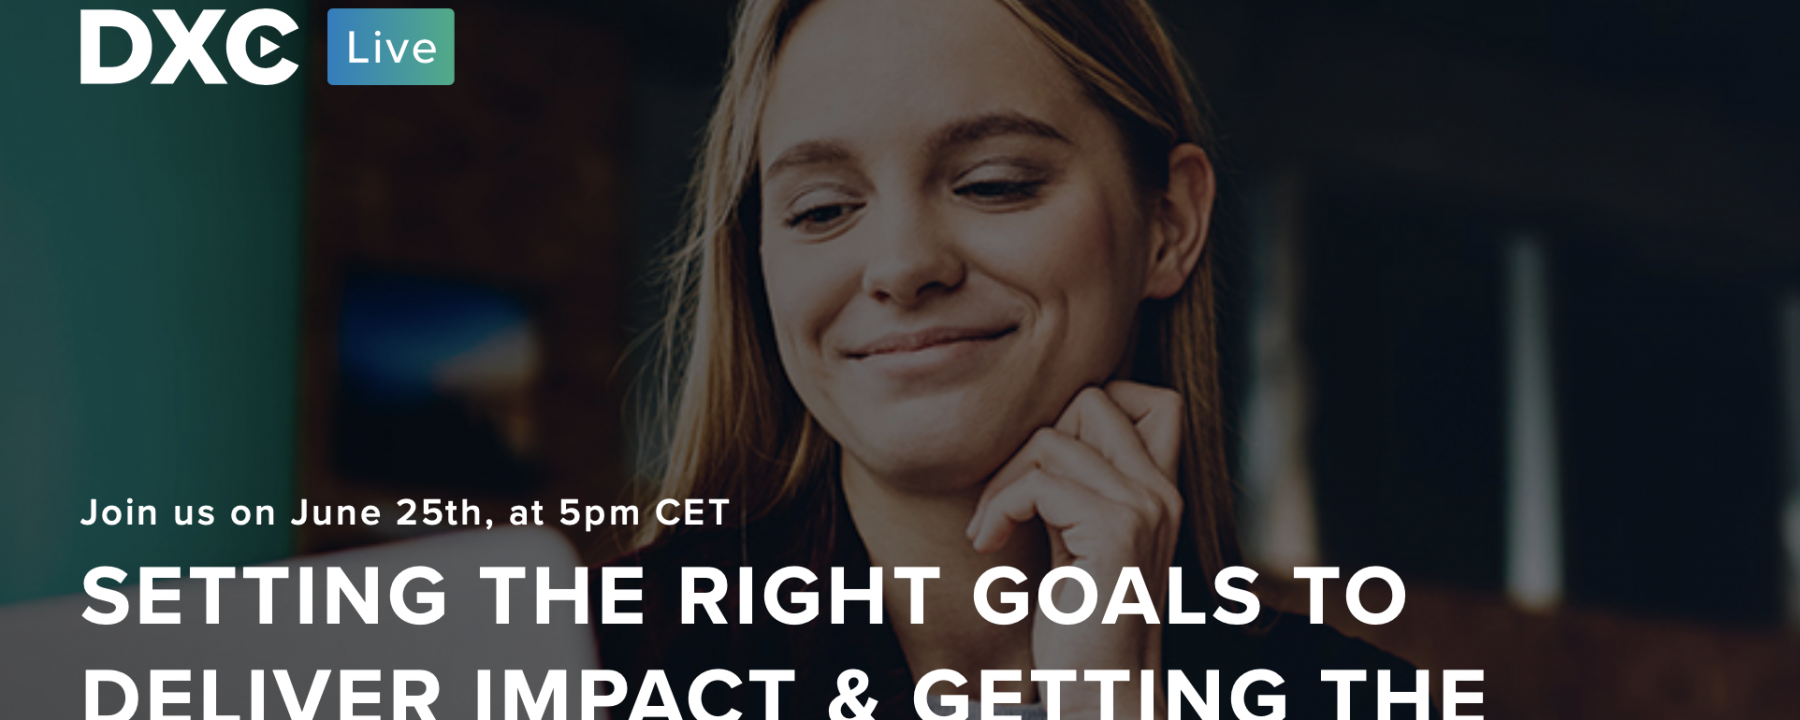 DigitalXChange Live : Setting the right goals to deliver impact par Applause